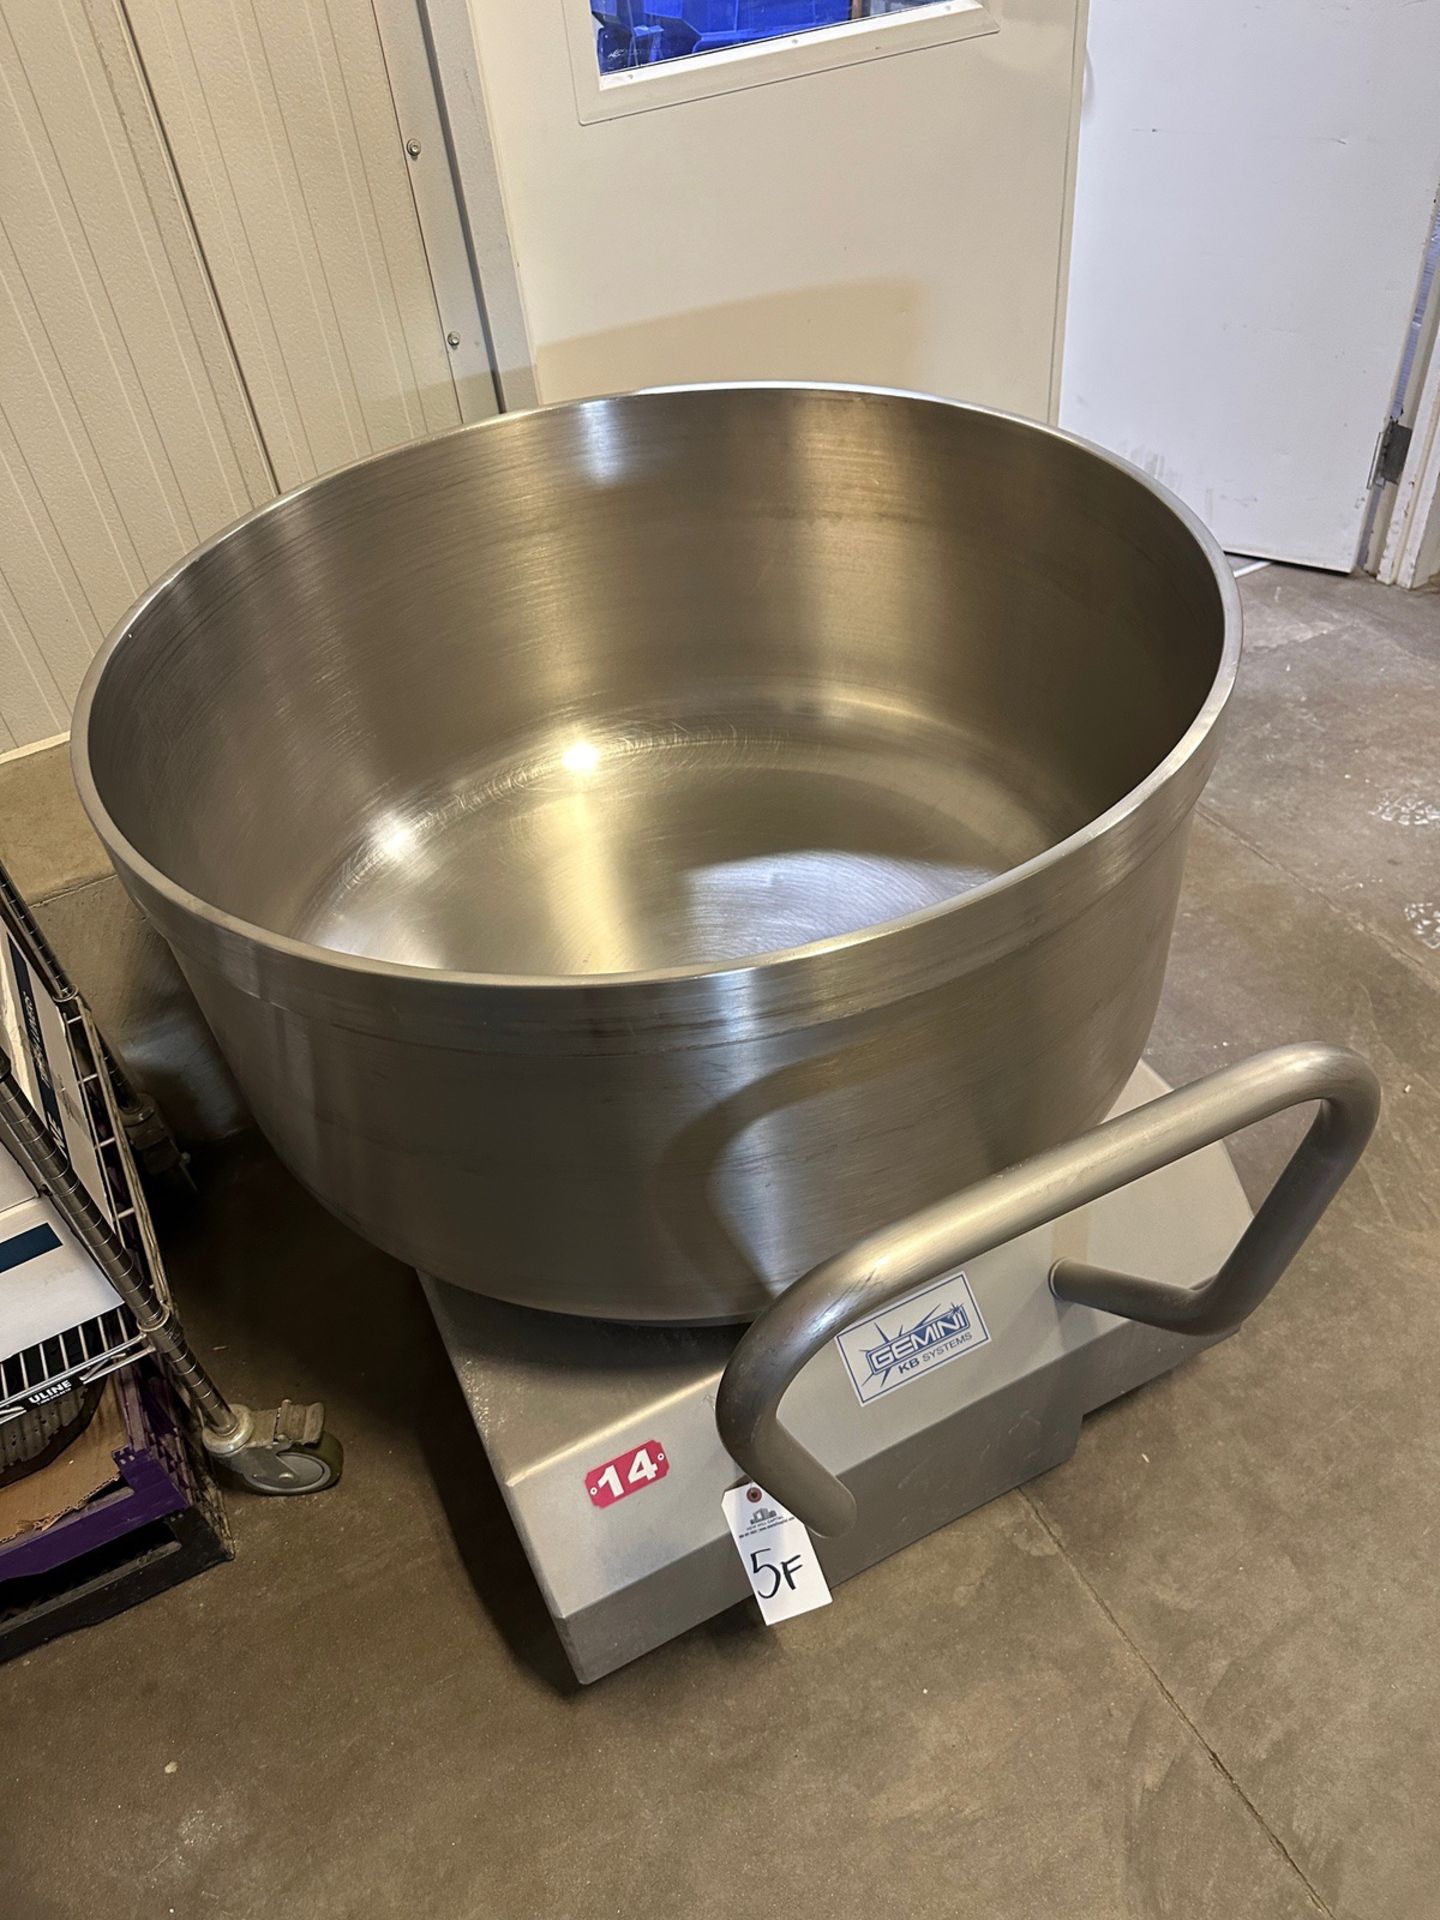 Lot of (1) Gemini 550 LB Capacity Stainless Steel Movable Bowl